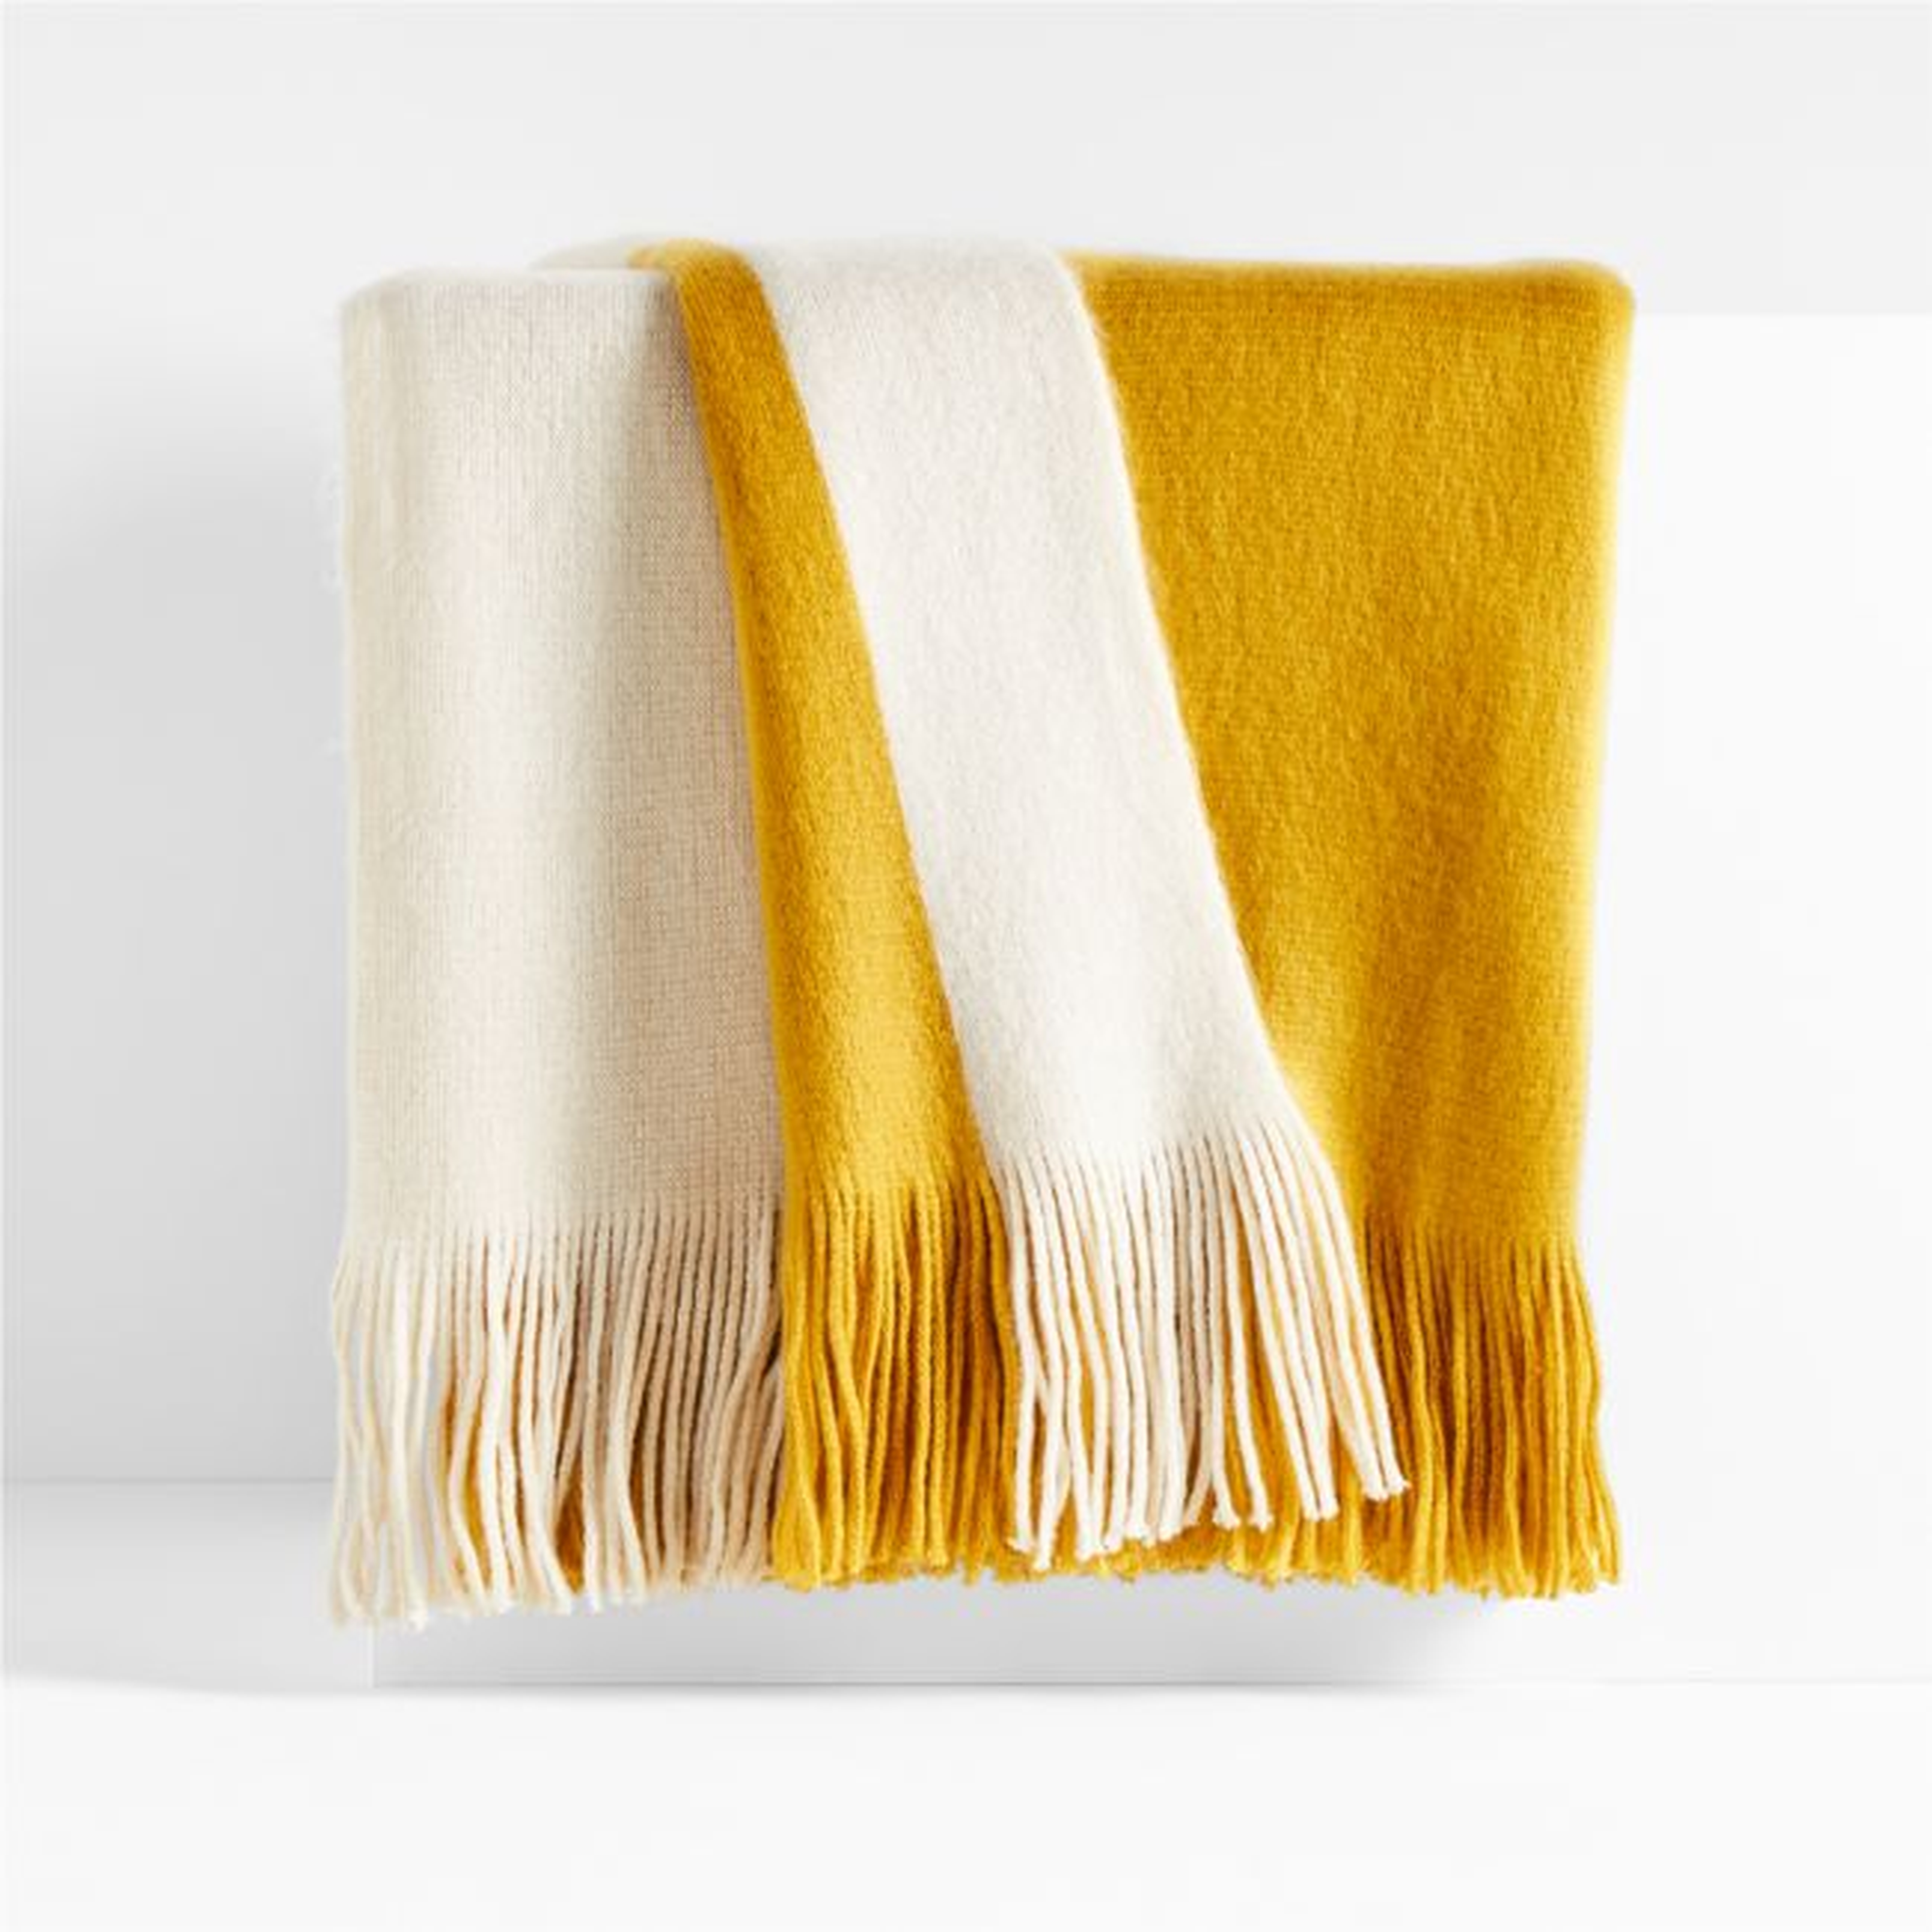 Tepi 70"x55" Ochre Throw Blanket - Crate and Barrel